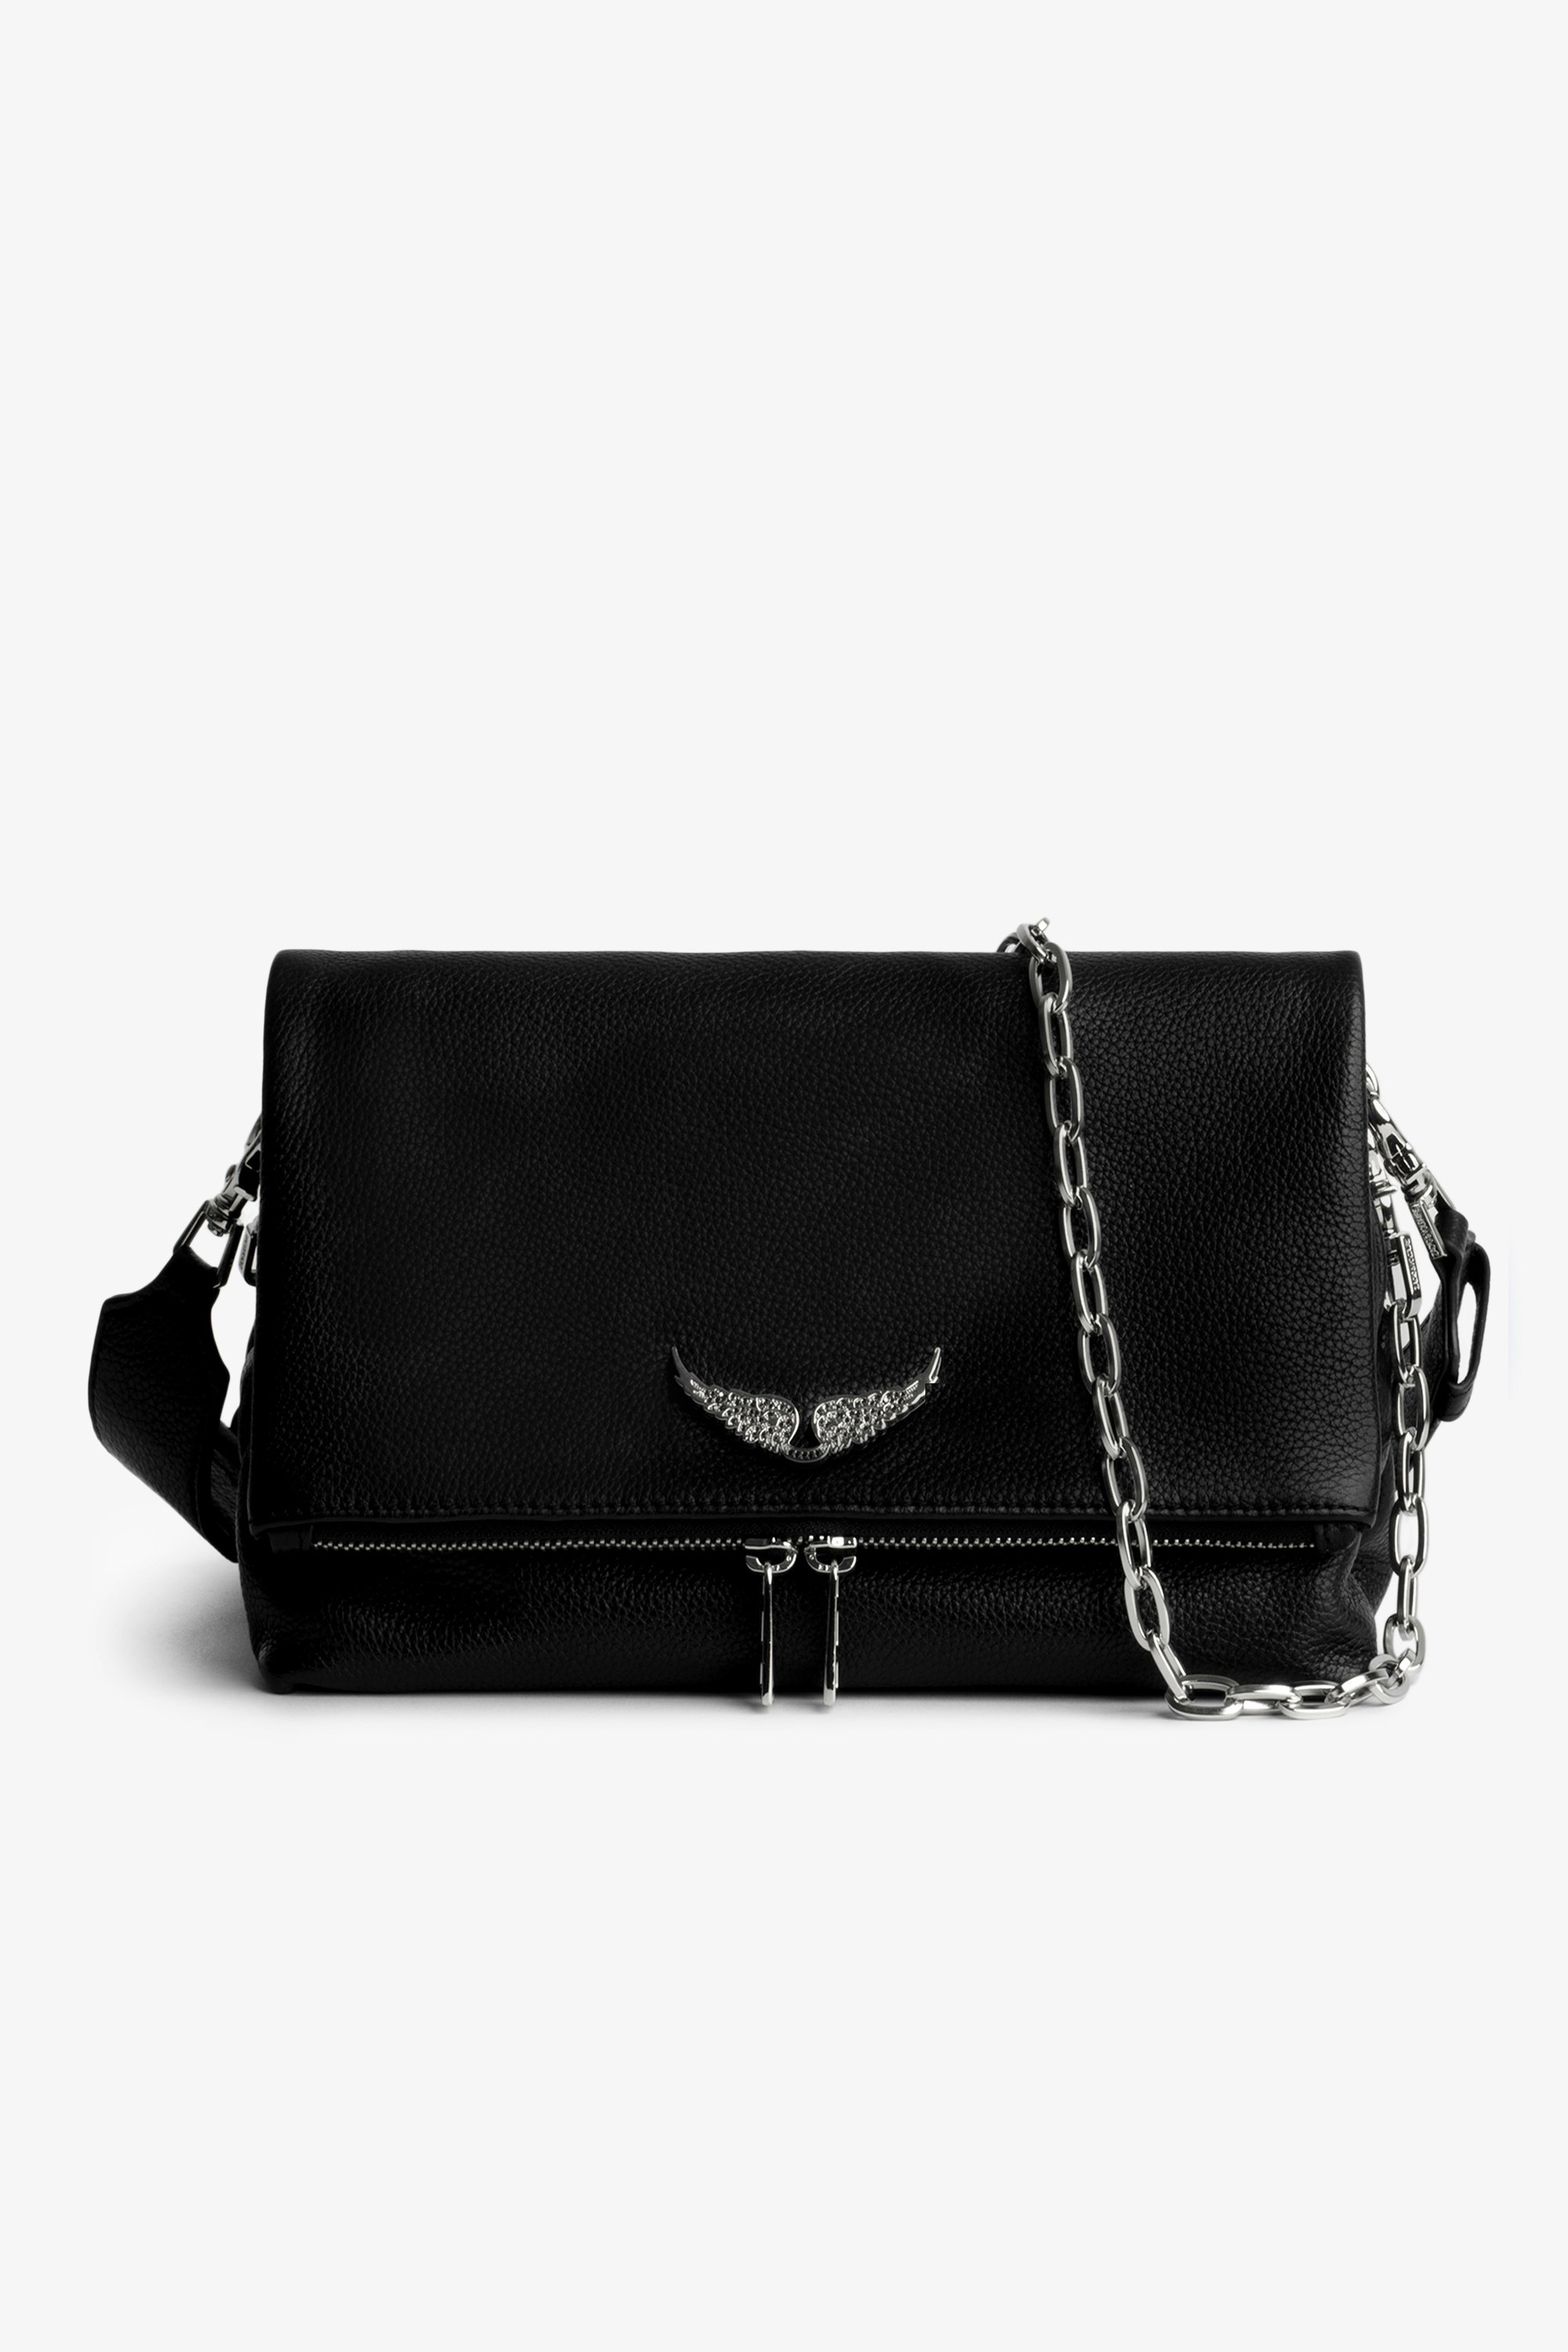 Swing Your Wings Rocky Bag Women’s black leather Rocky bag with silver-toned metal shoulder strap